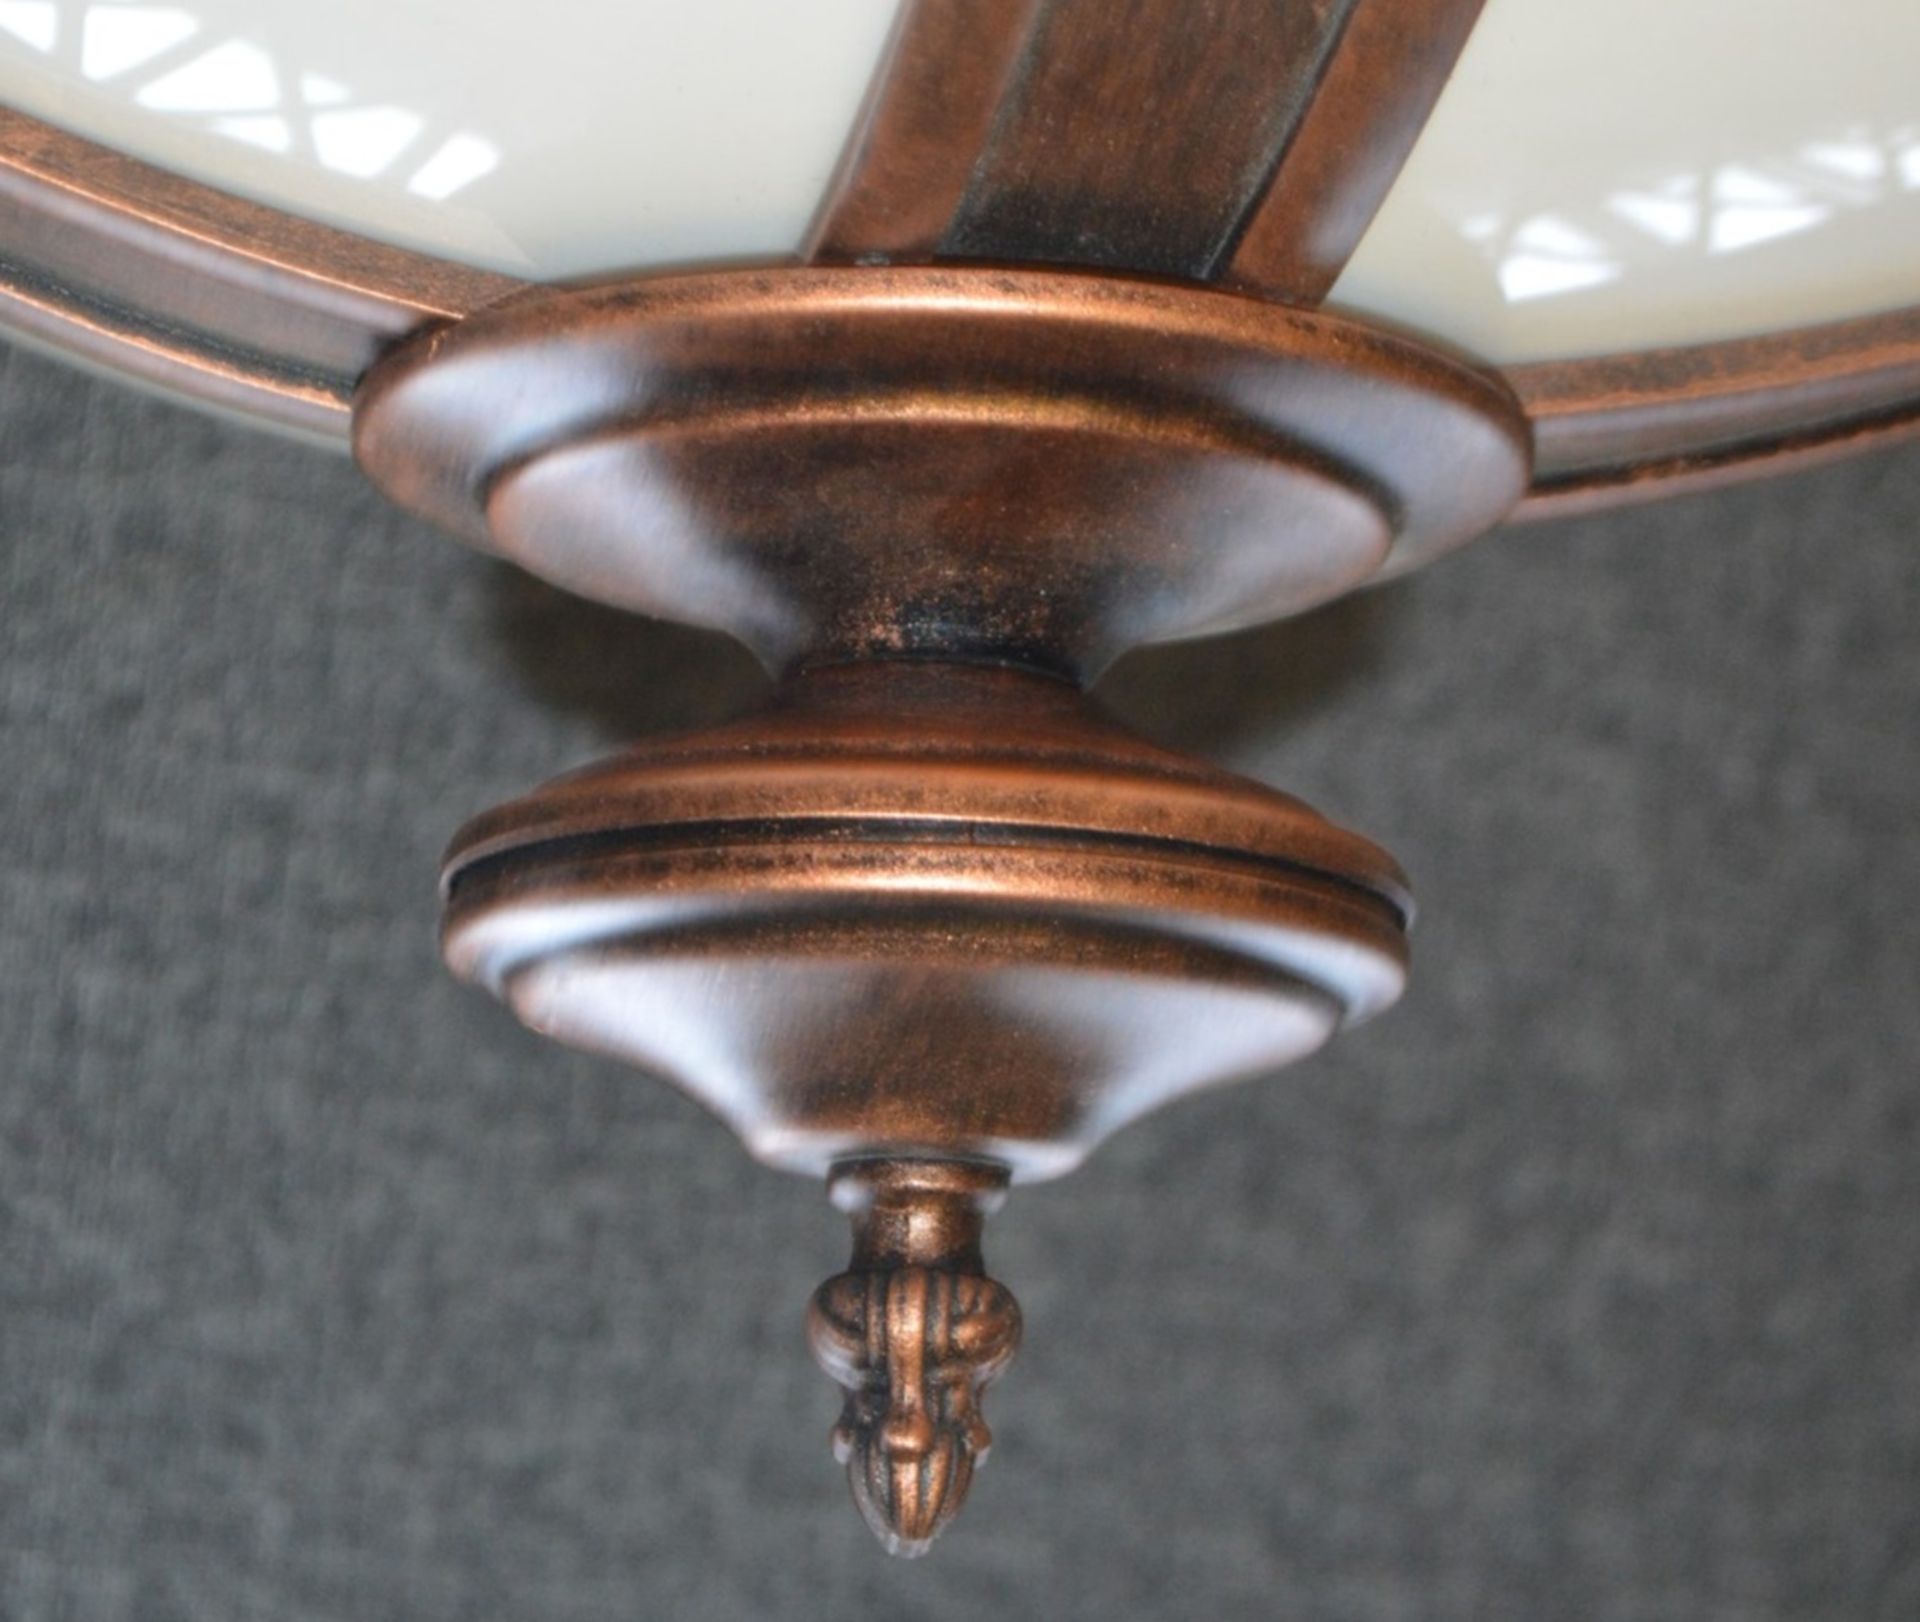 1 x CHELSOM Large Opulent Roman-Style Half Globe Ceiling Light With An Acrylic Opal Shade - Unused - Image 5 of 5